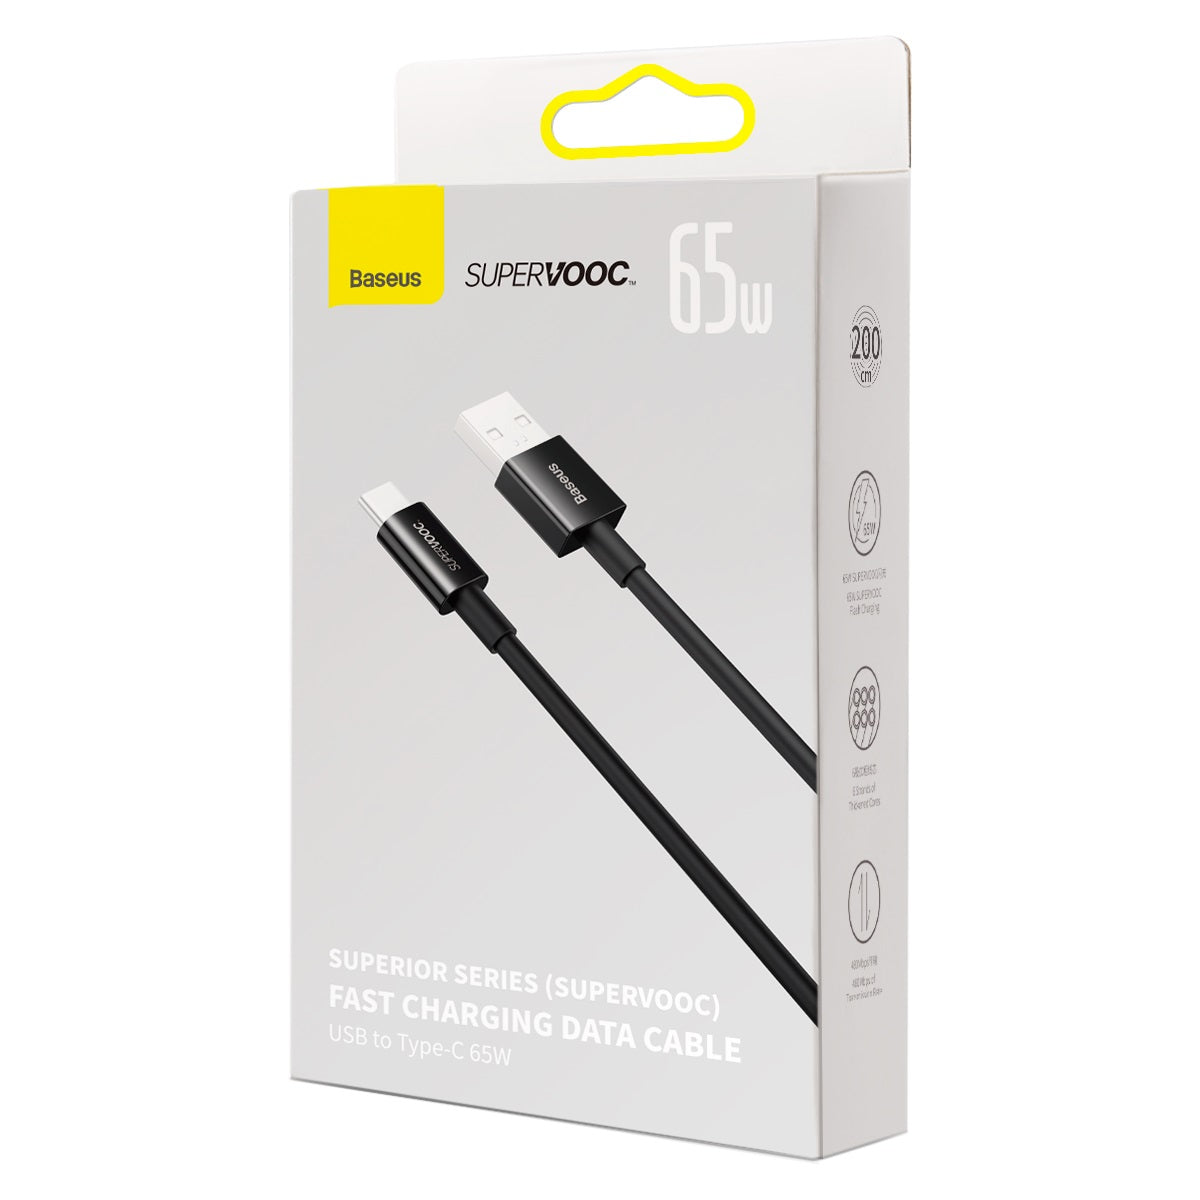 Baseus Superior Series (SUPERVOOC) USB to Type-C 65W Fast Charging Data Cable